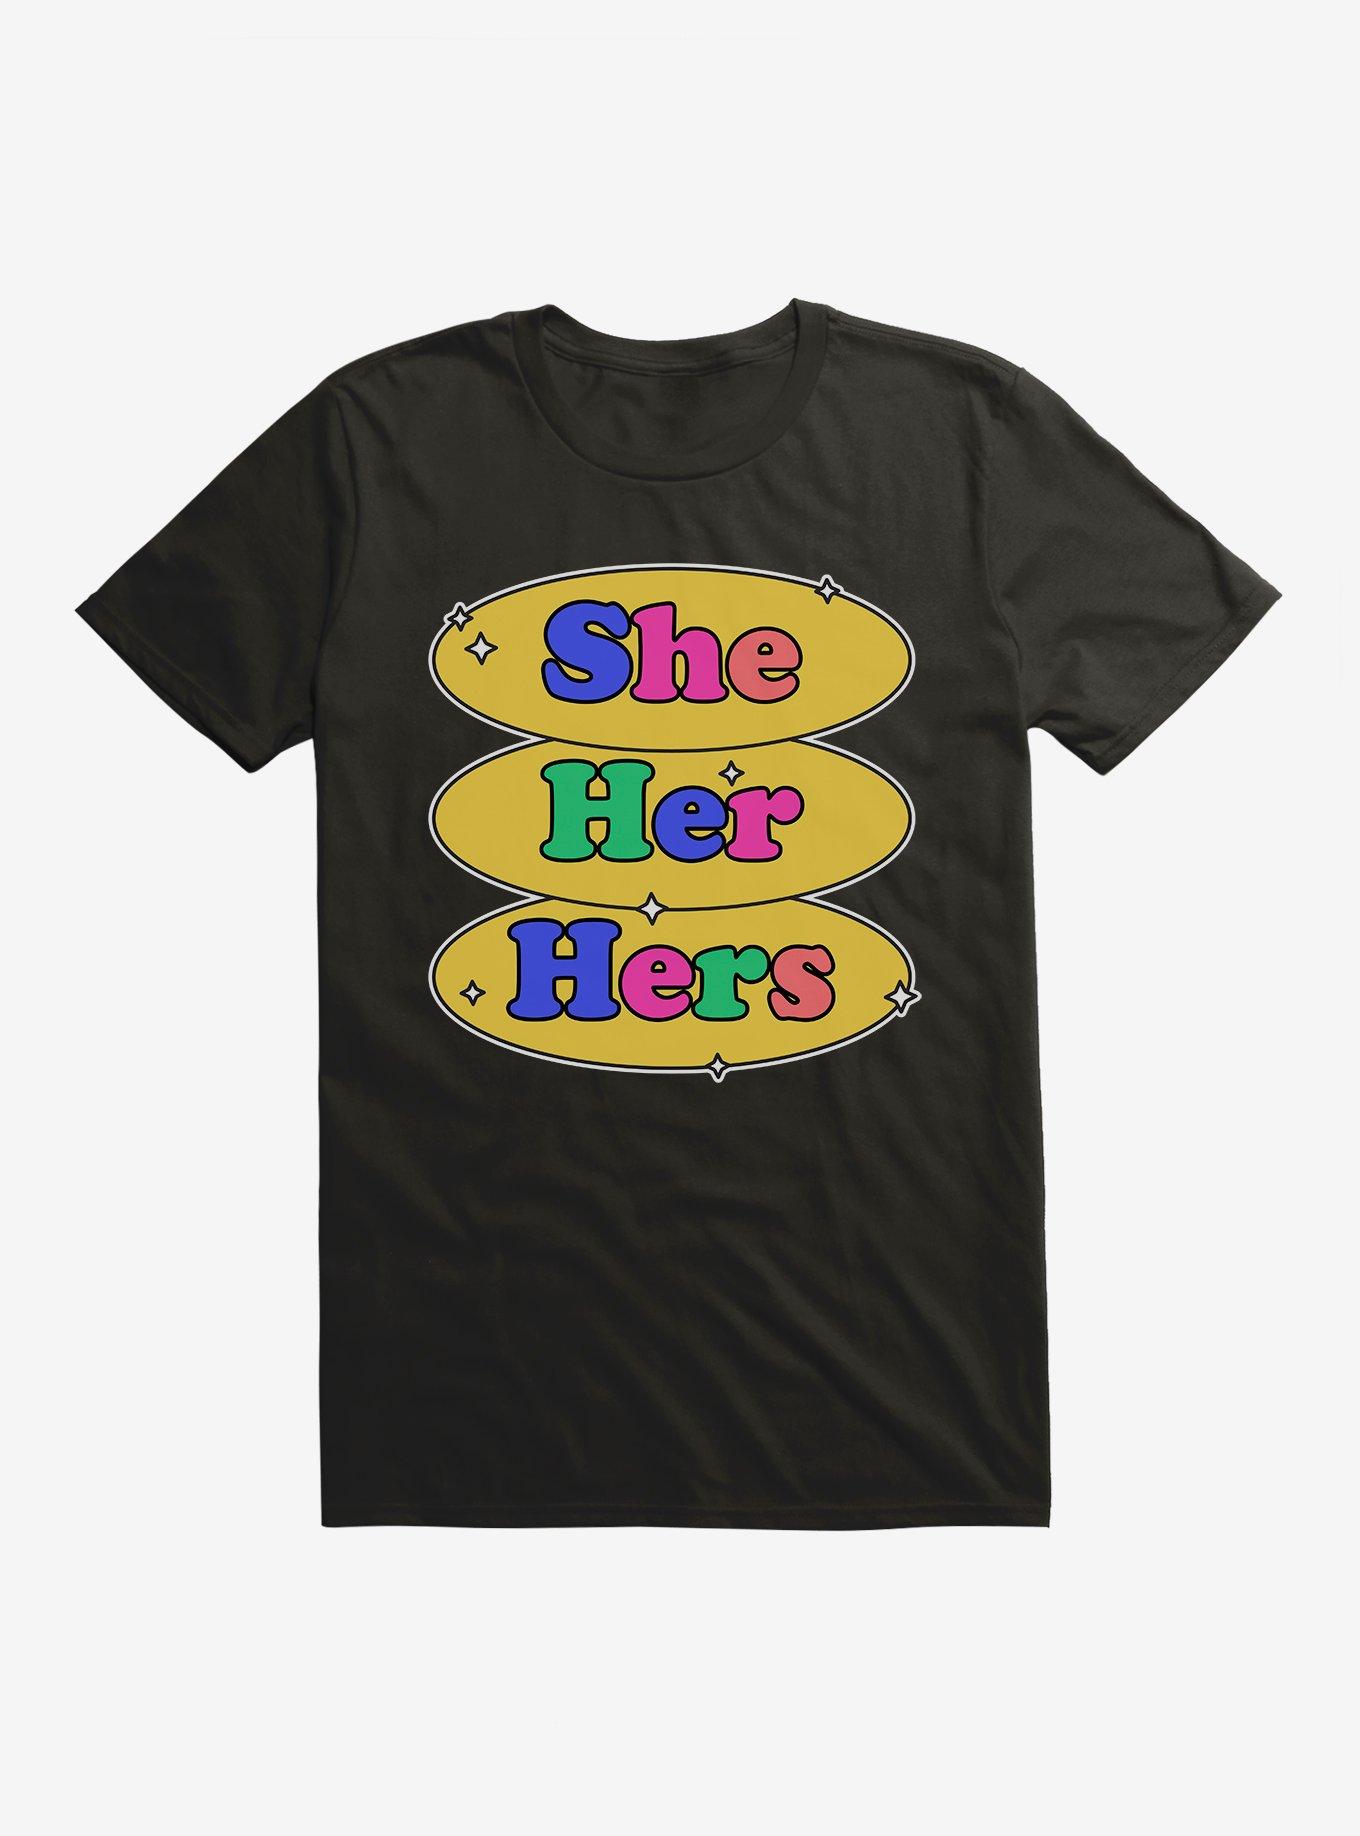 Pride Pronouns She Her Hers T-Shirt